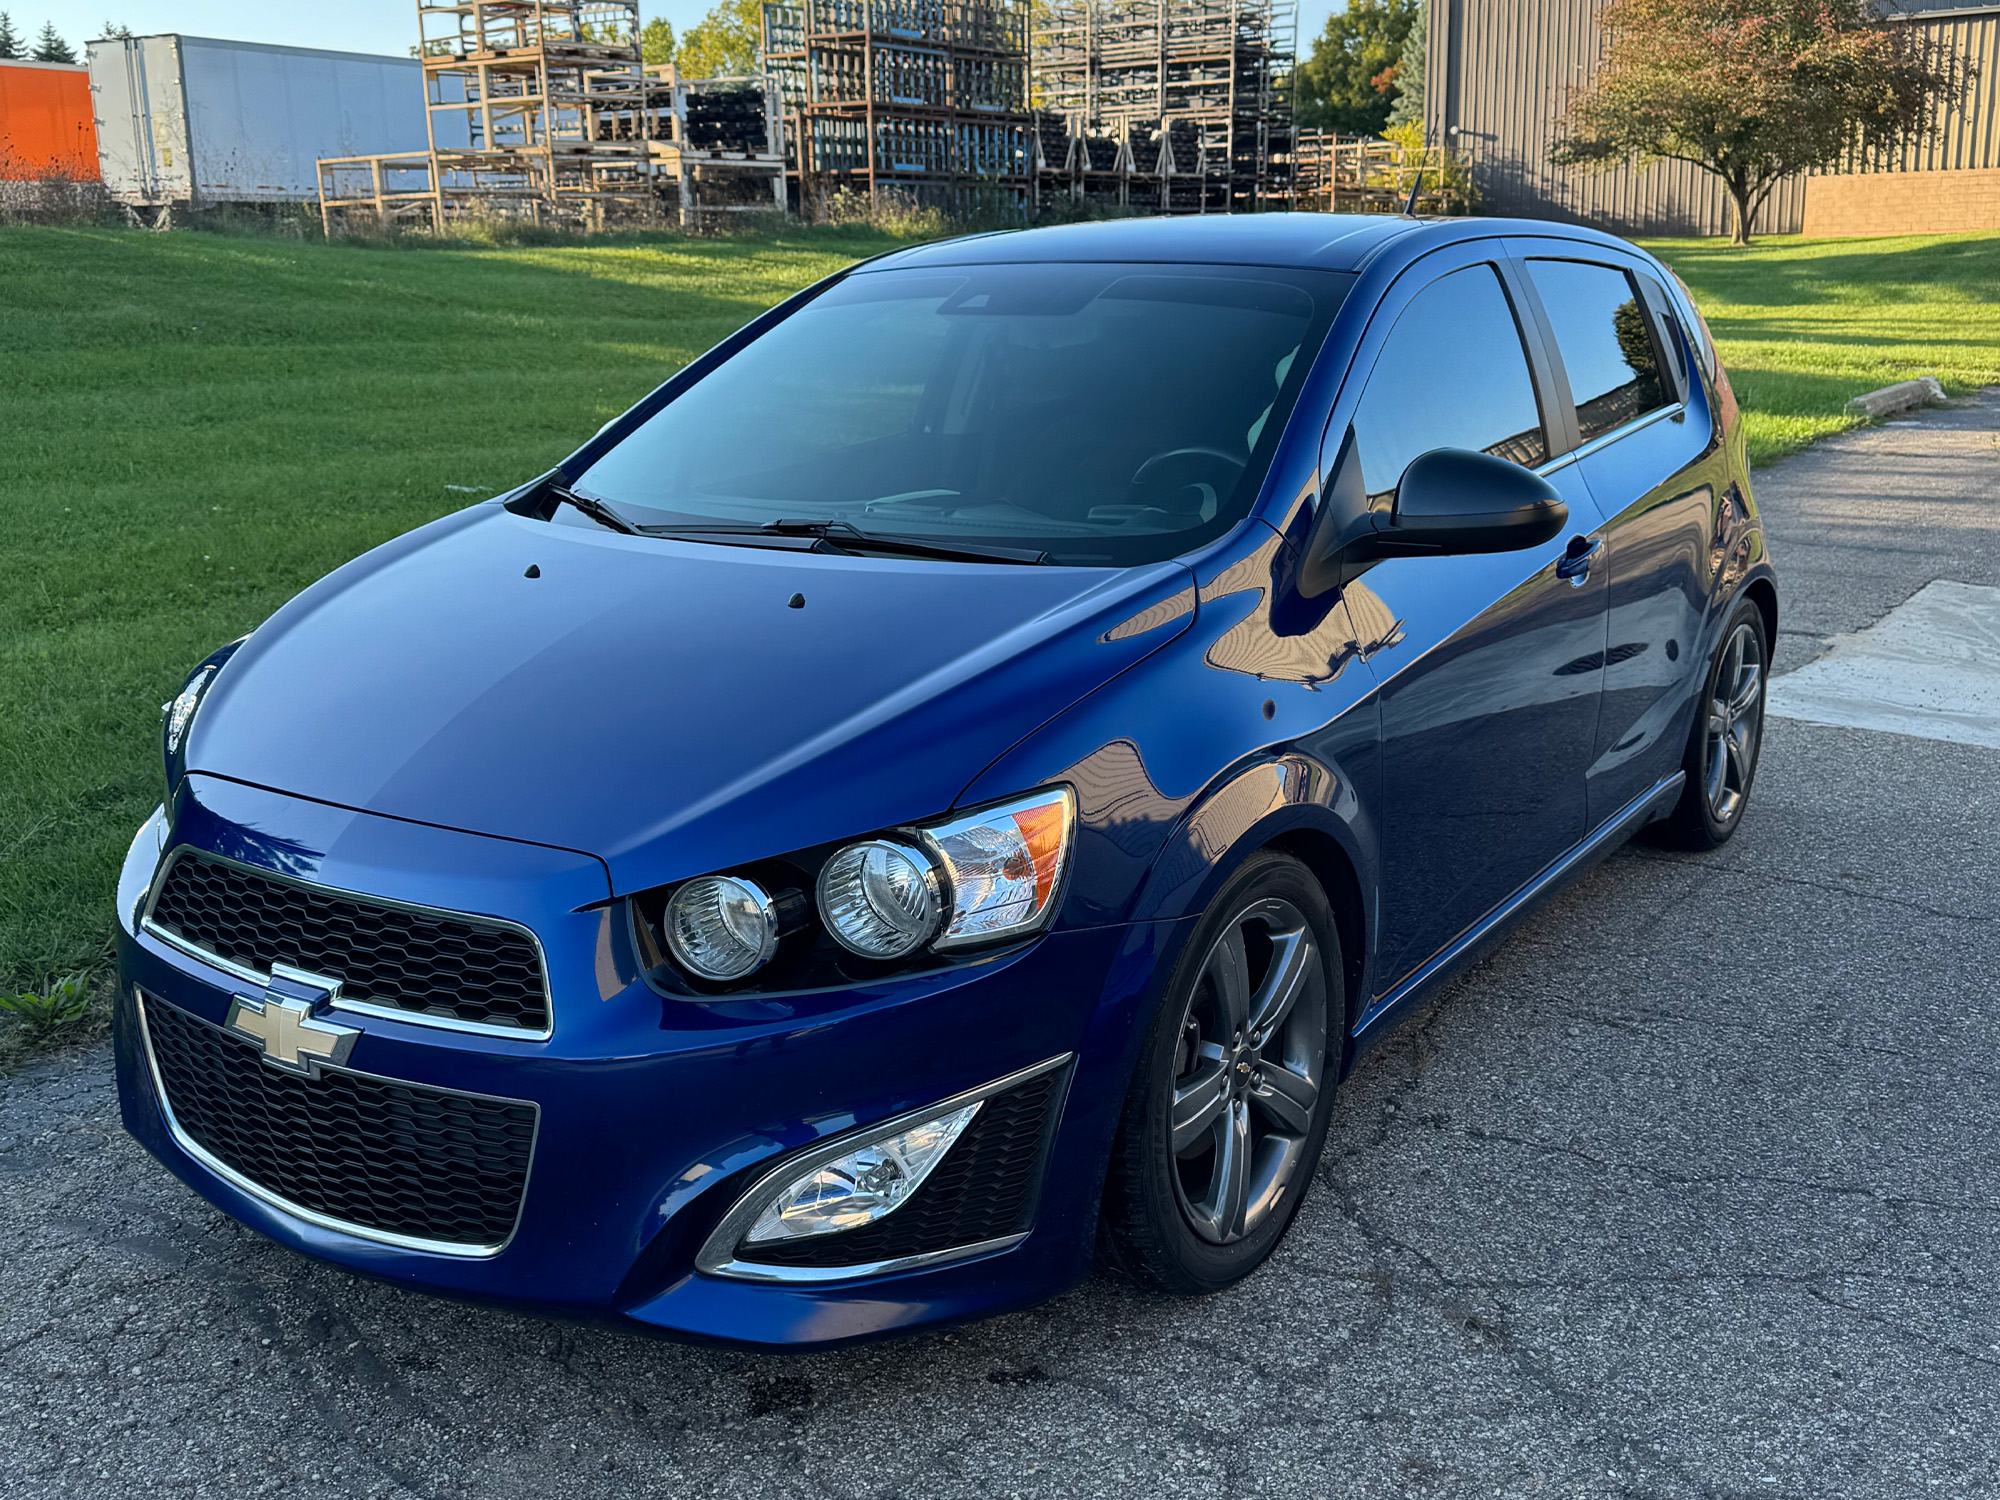 2014 Chevy Sonic RS 6 Speed Manual - 